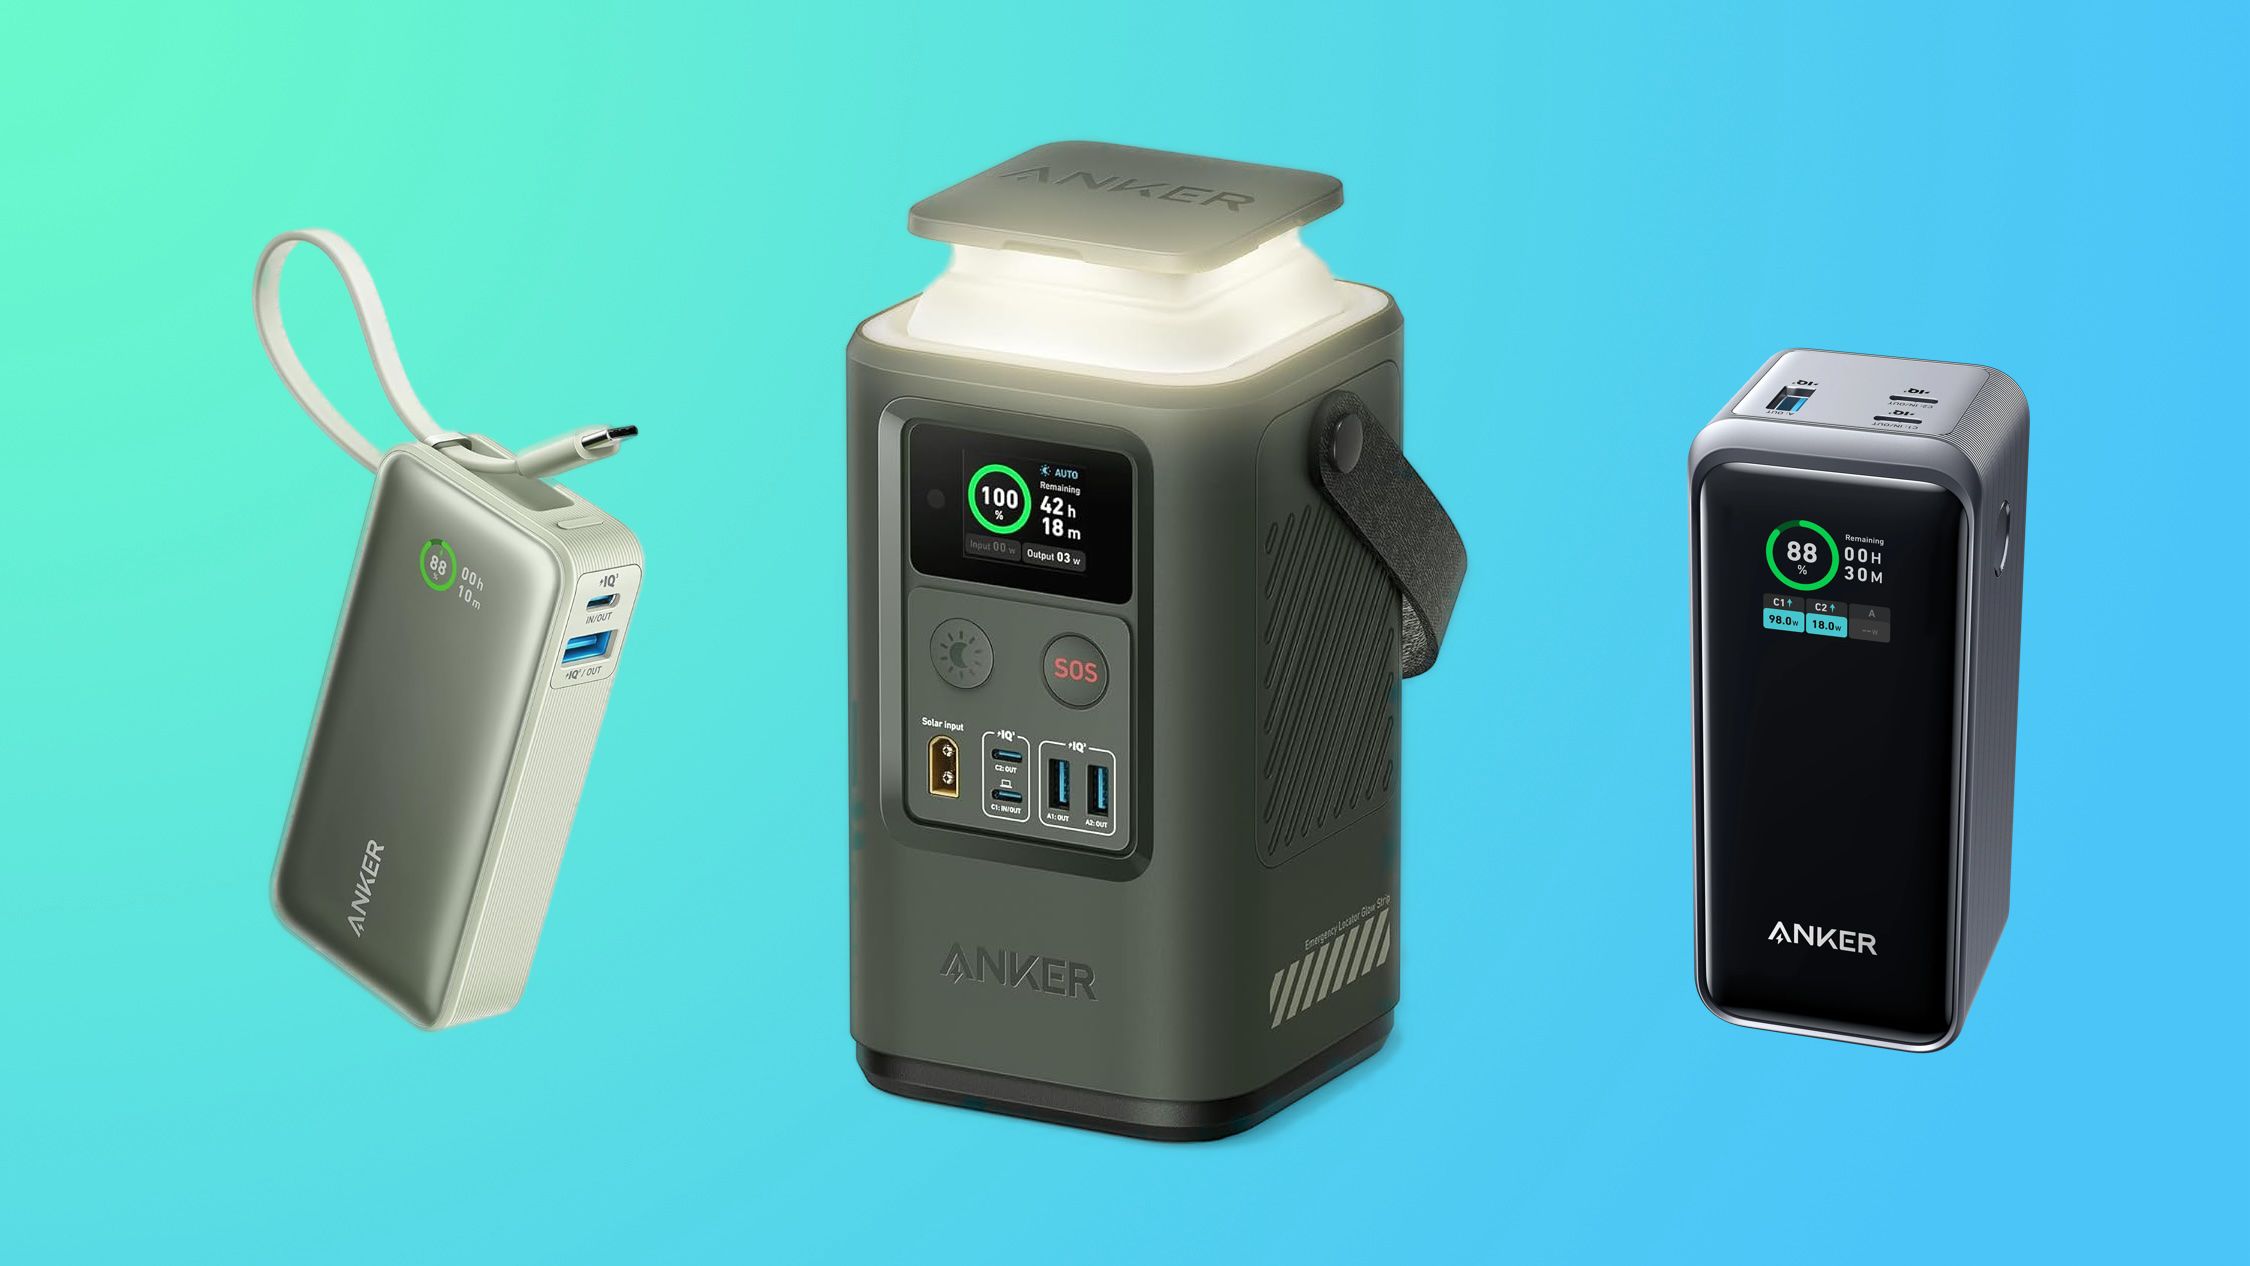 Upgrade your tech gear with discounted Anker products for a limited time